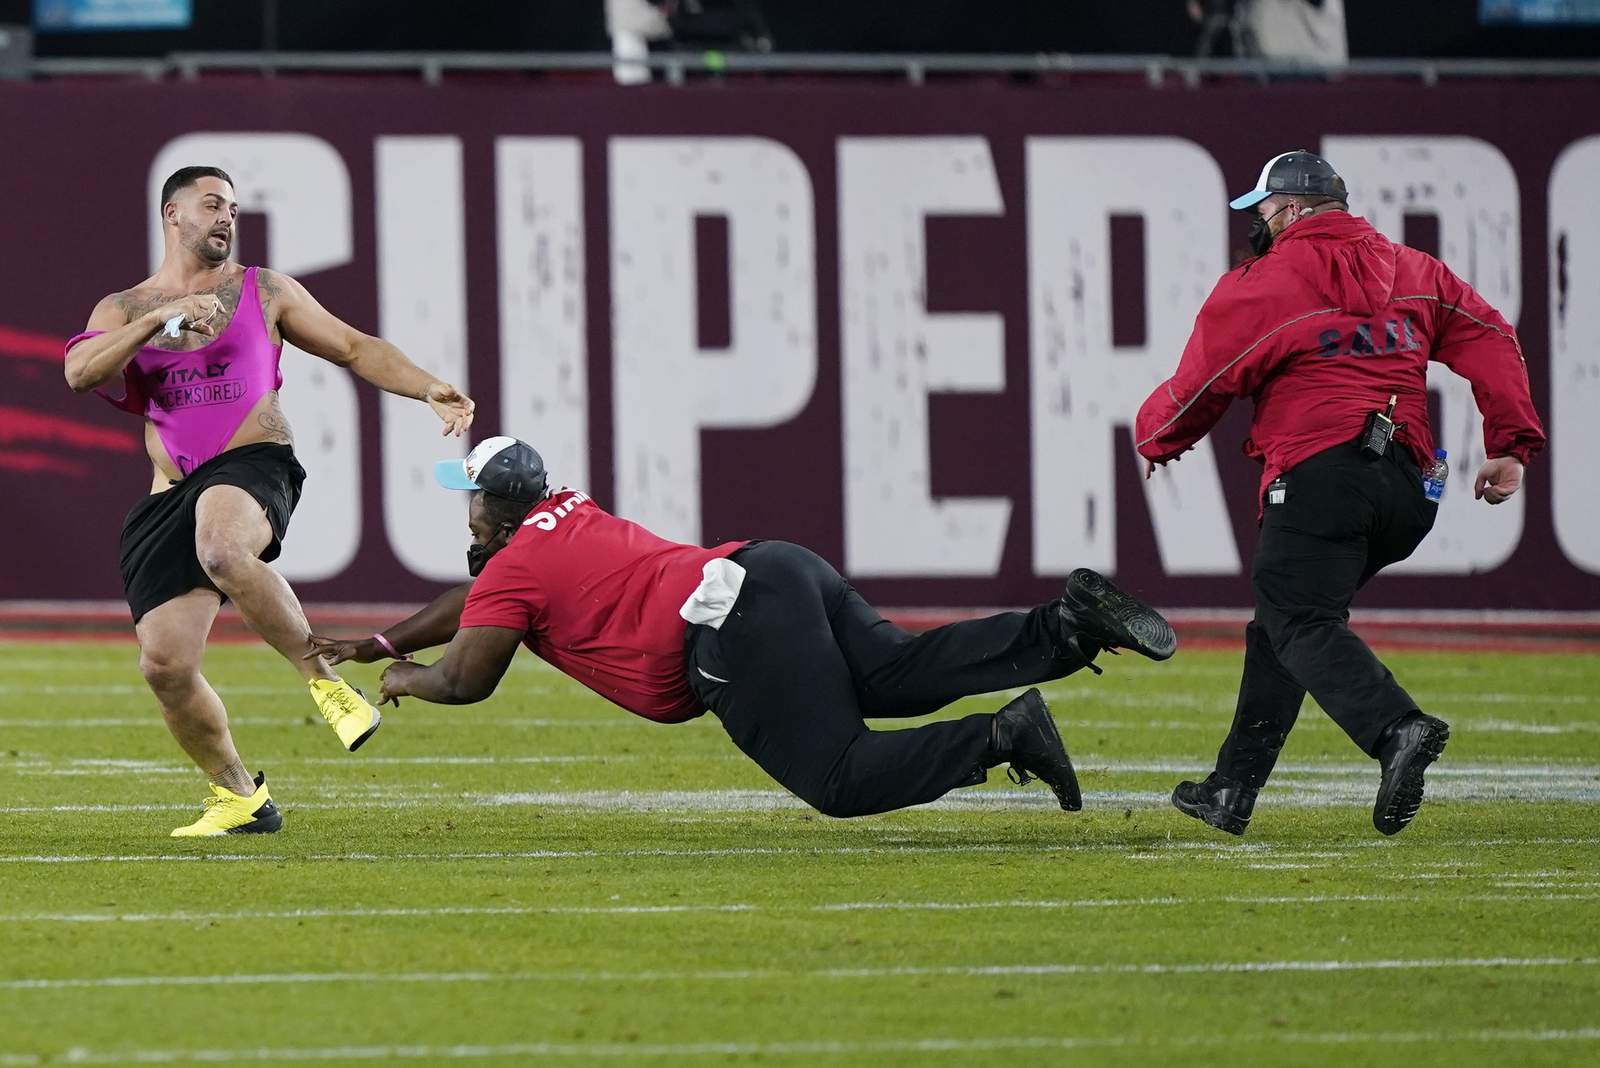 Listen to Kevin Harlan’s hilarious call of Super Bowl streaker: ‘Pull up your pants!’